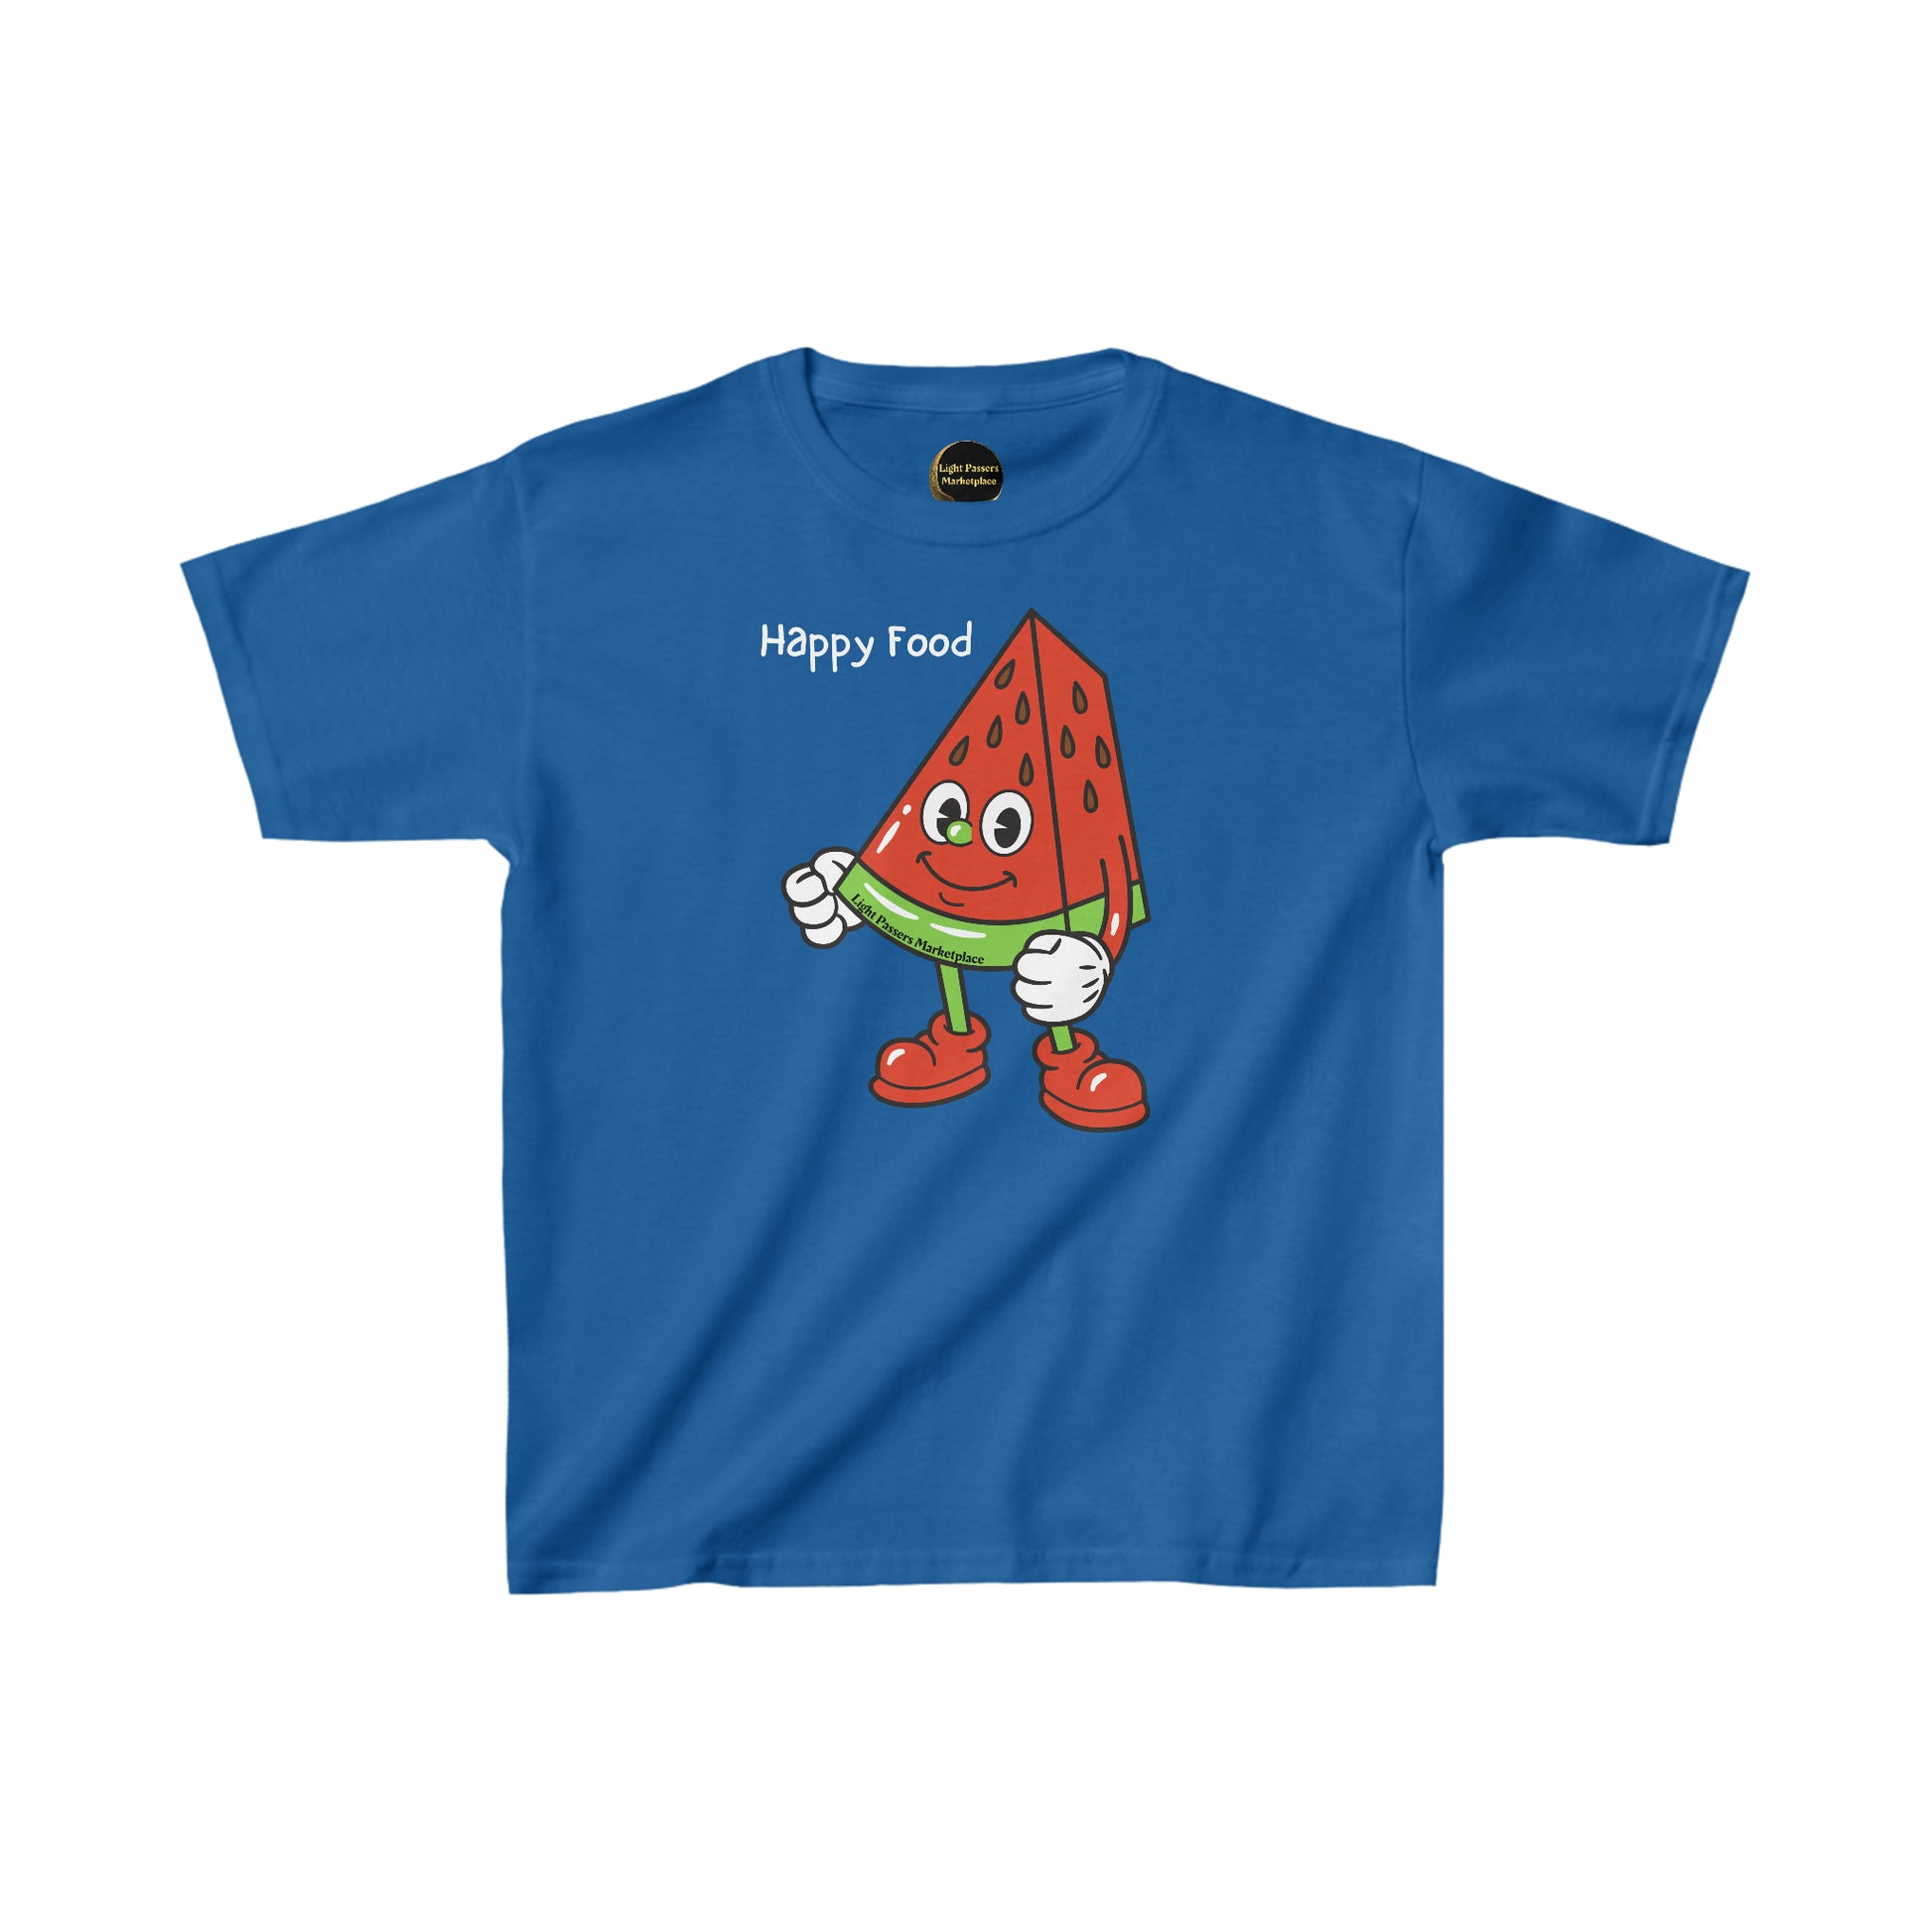 A blue youth t-shirt featuring a cartoon watermelon character, made of 100% cotton with twill tape shoulders for durability. Ethically produced by Gildan with a classic fit and tear-away labels.